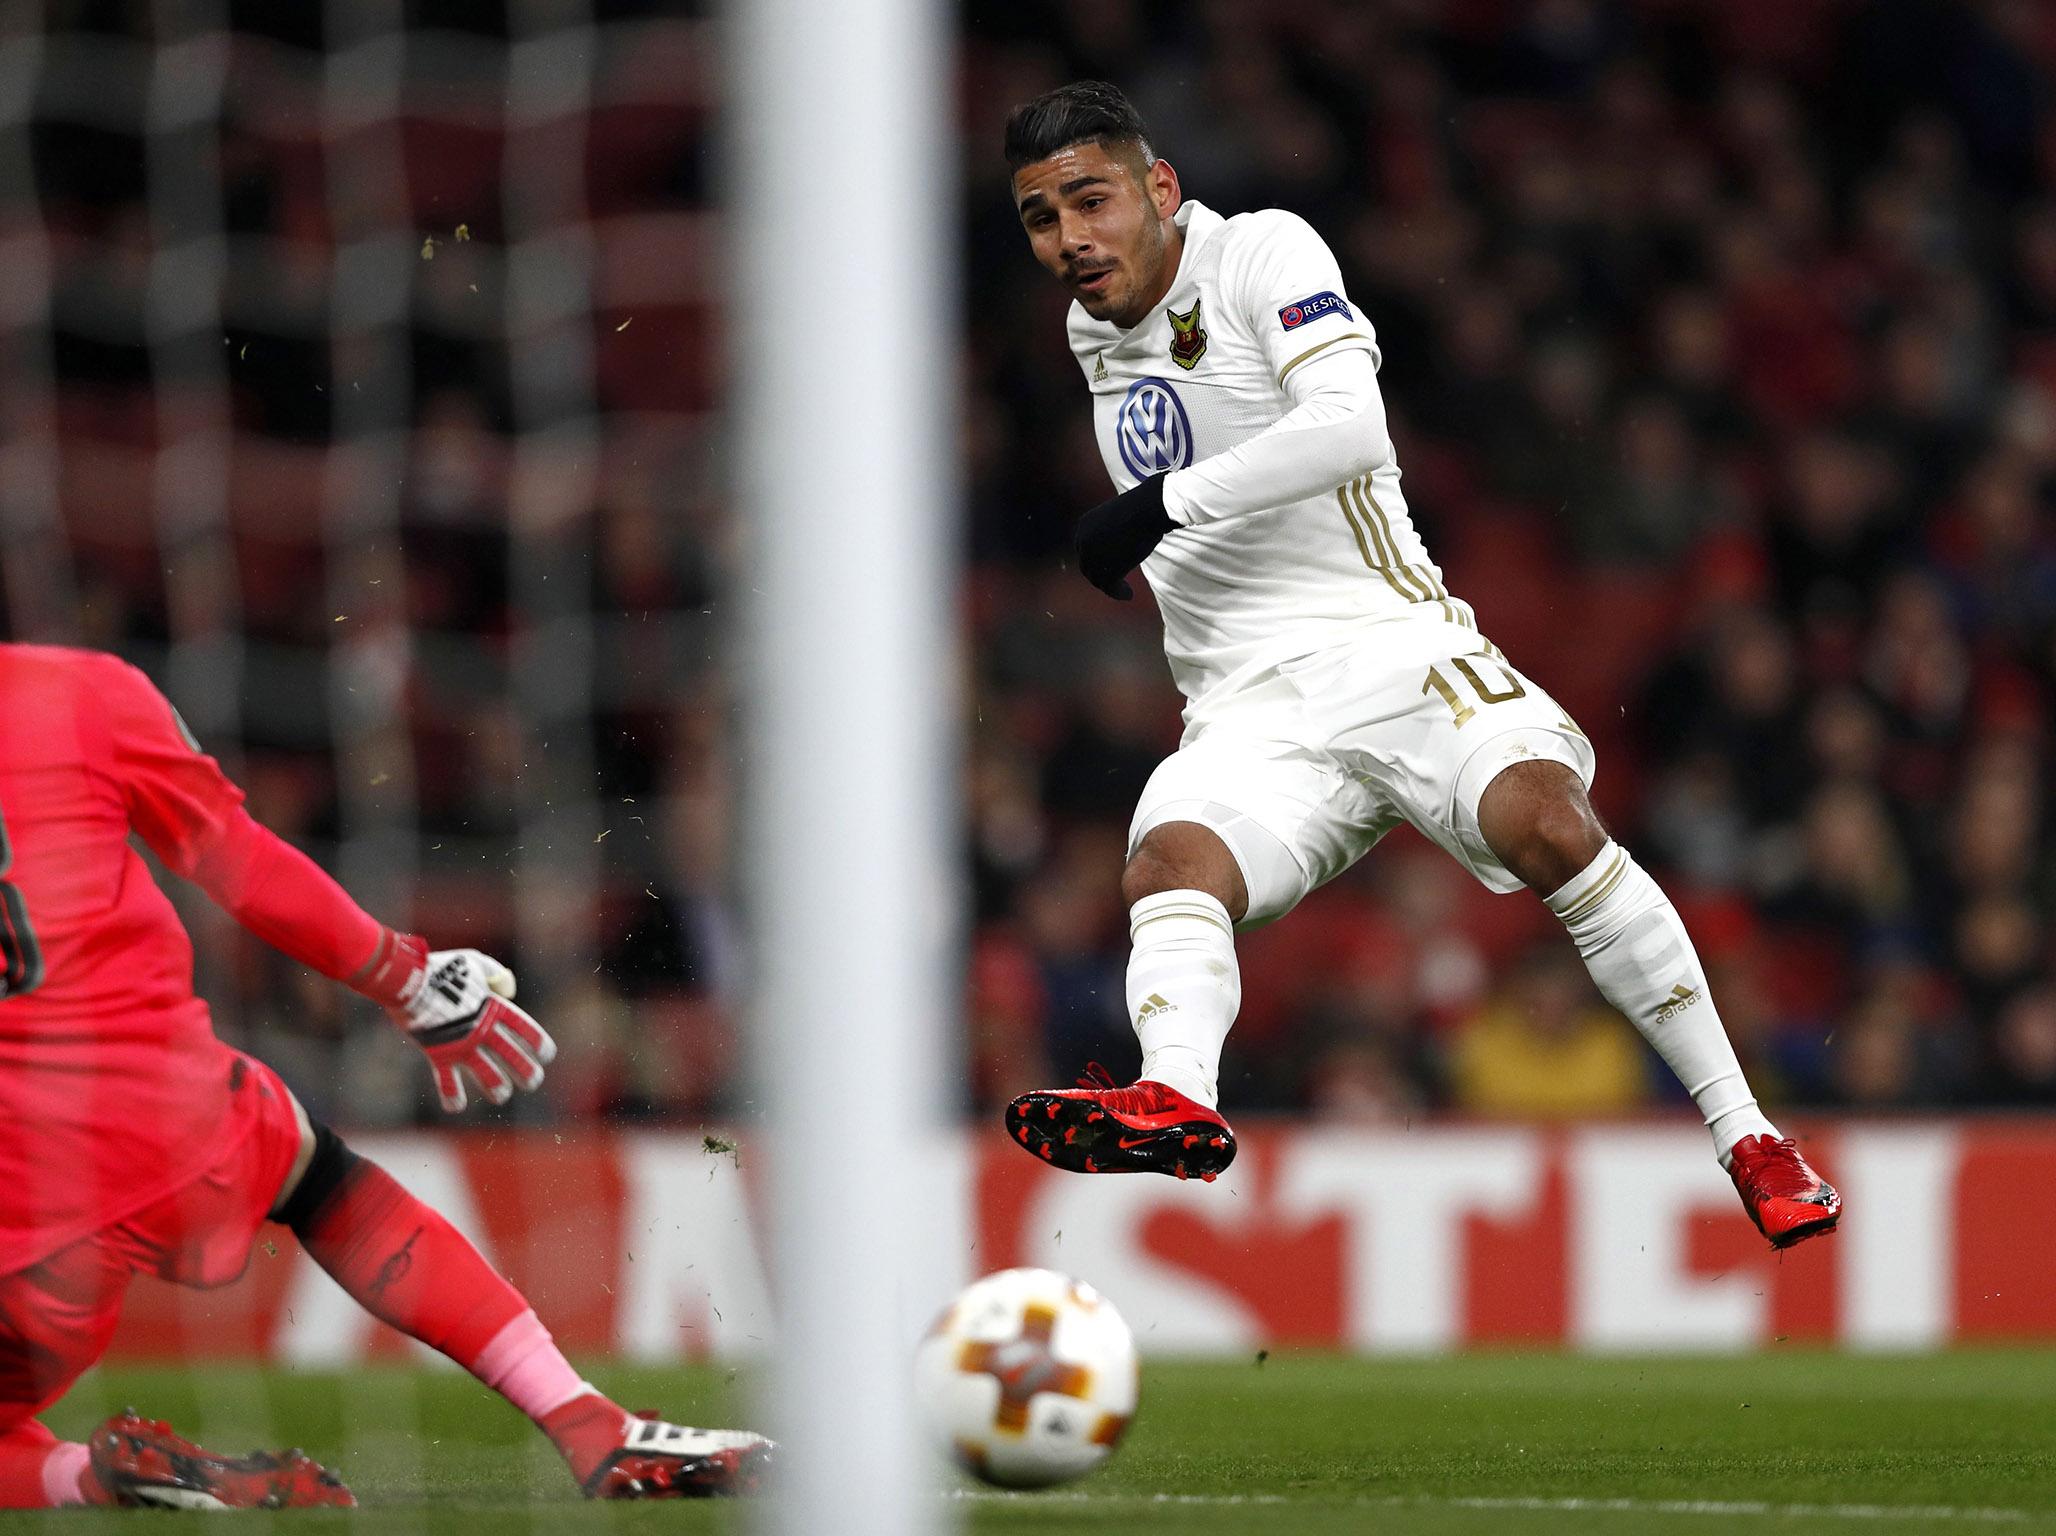 Arsenal vs Ostersunds FK: Europa League round-of-32 second leg – LIVE!